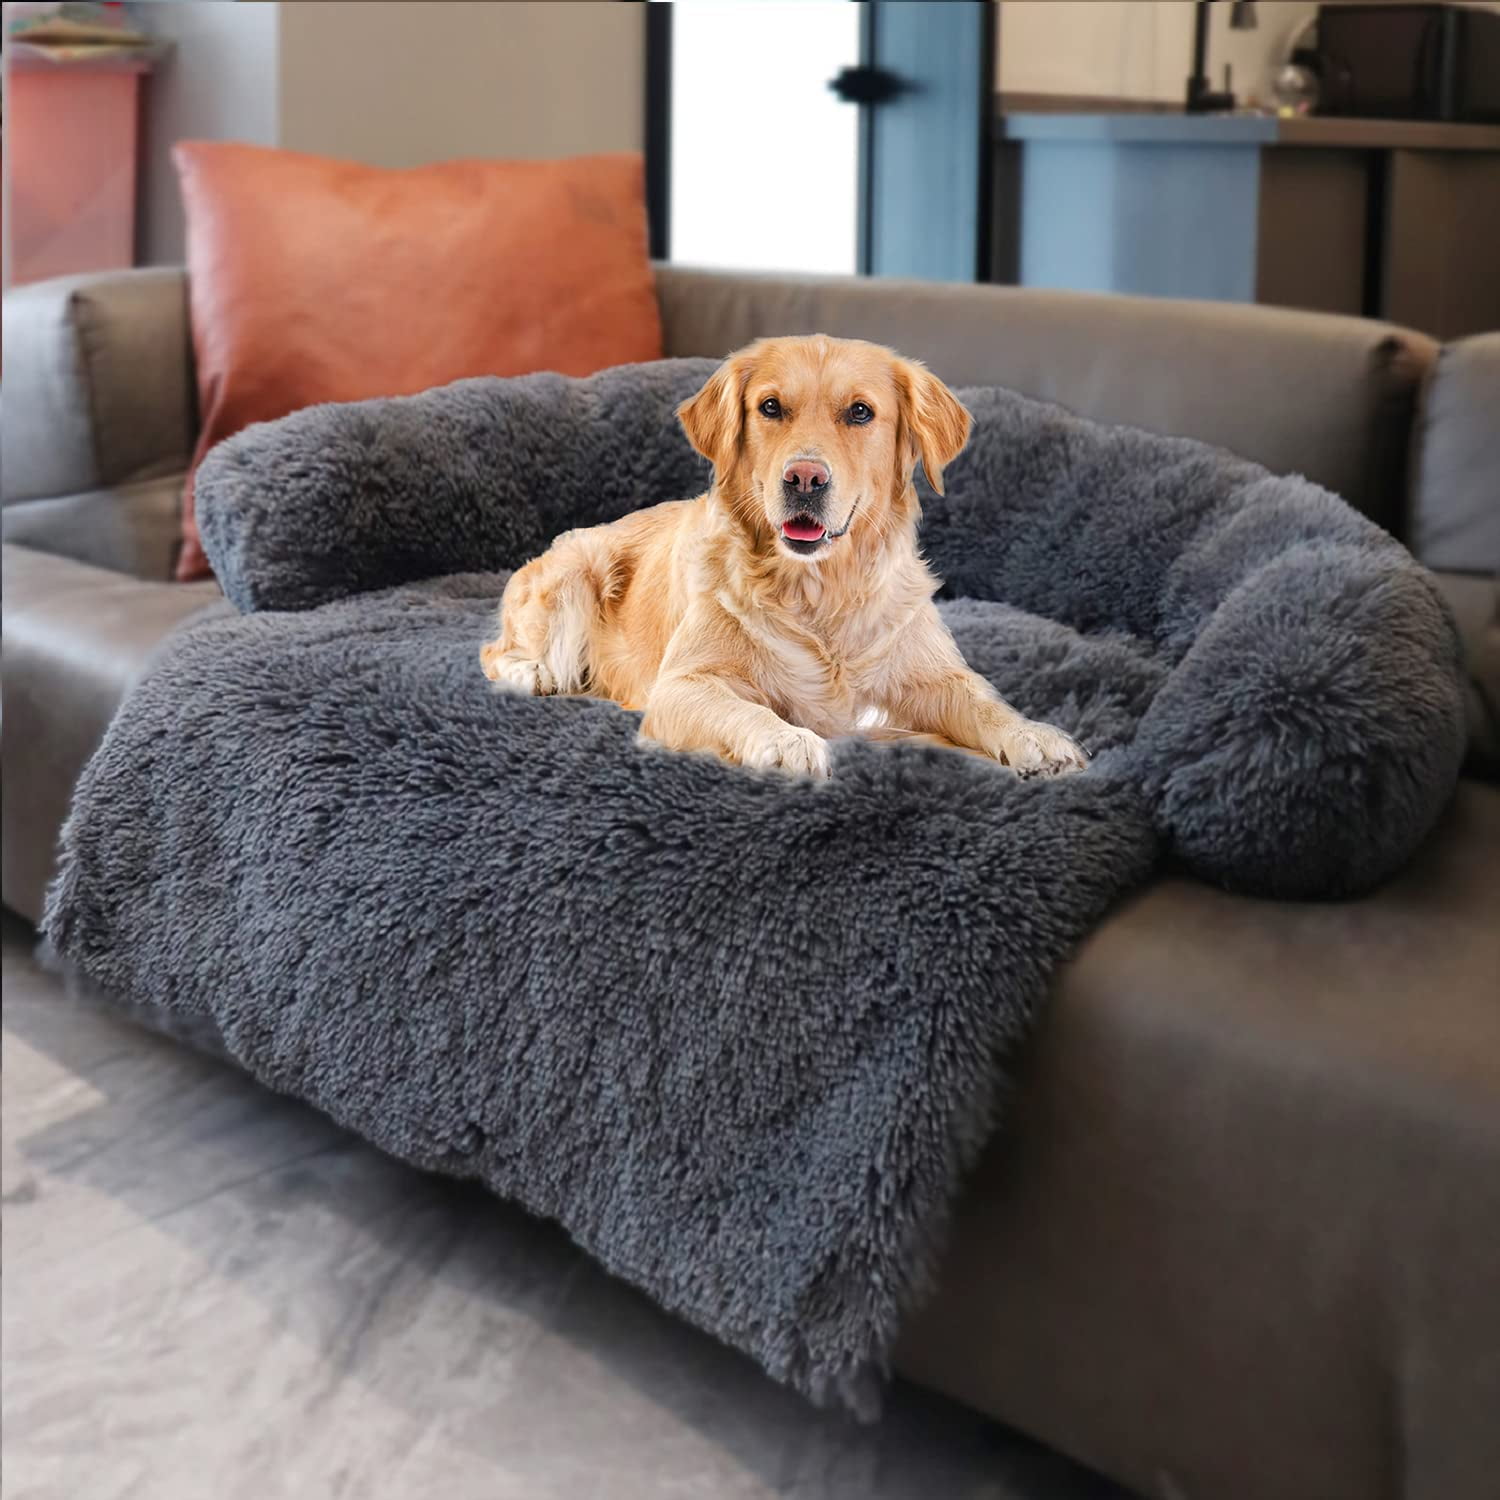 Pet Furniture Protector for Dog with Memory Foam Neck Bolster Ultra Soft Square Pet Bed Suitable for Small Dog/Cats MoonxHome Plush Pet Sofa Bed Removable Cover and Nonskid Bottom Dark Gray 